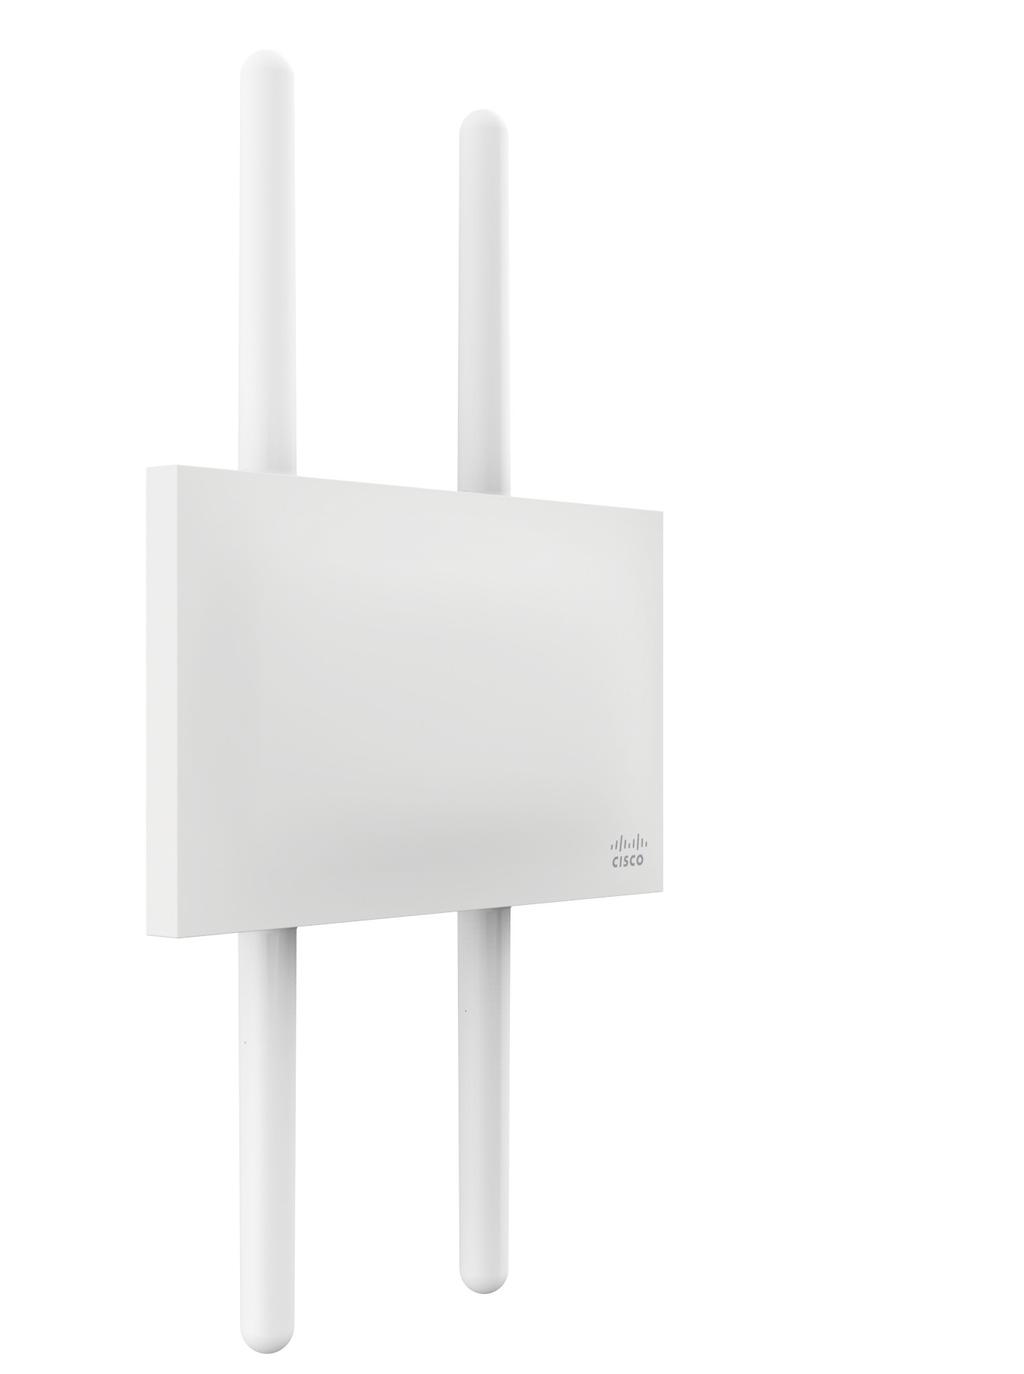 Datasheet MR74 MR74 Dual-band 2x2 MIMO 802.11ac Wave 2 access point with separate radios dedicated to security, RF Management, and Bluetooth General purpose industrial / outdoor 802.